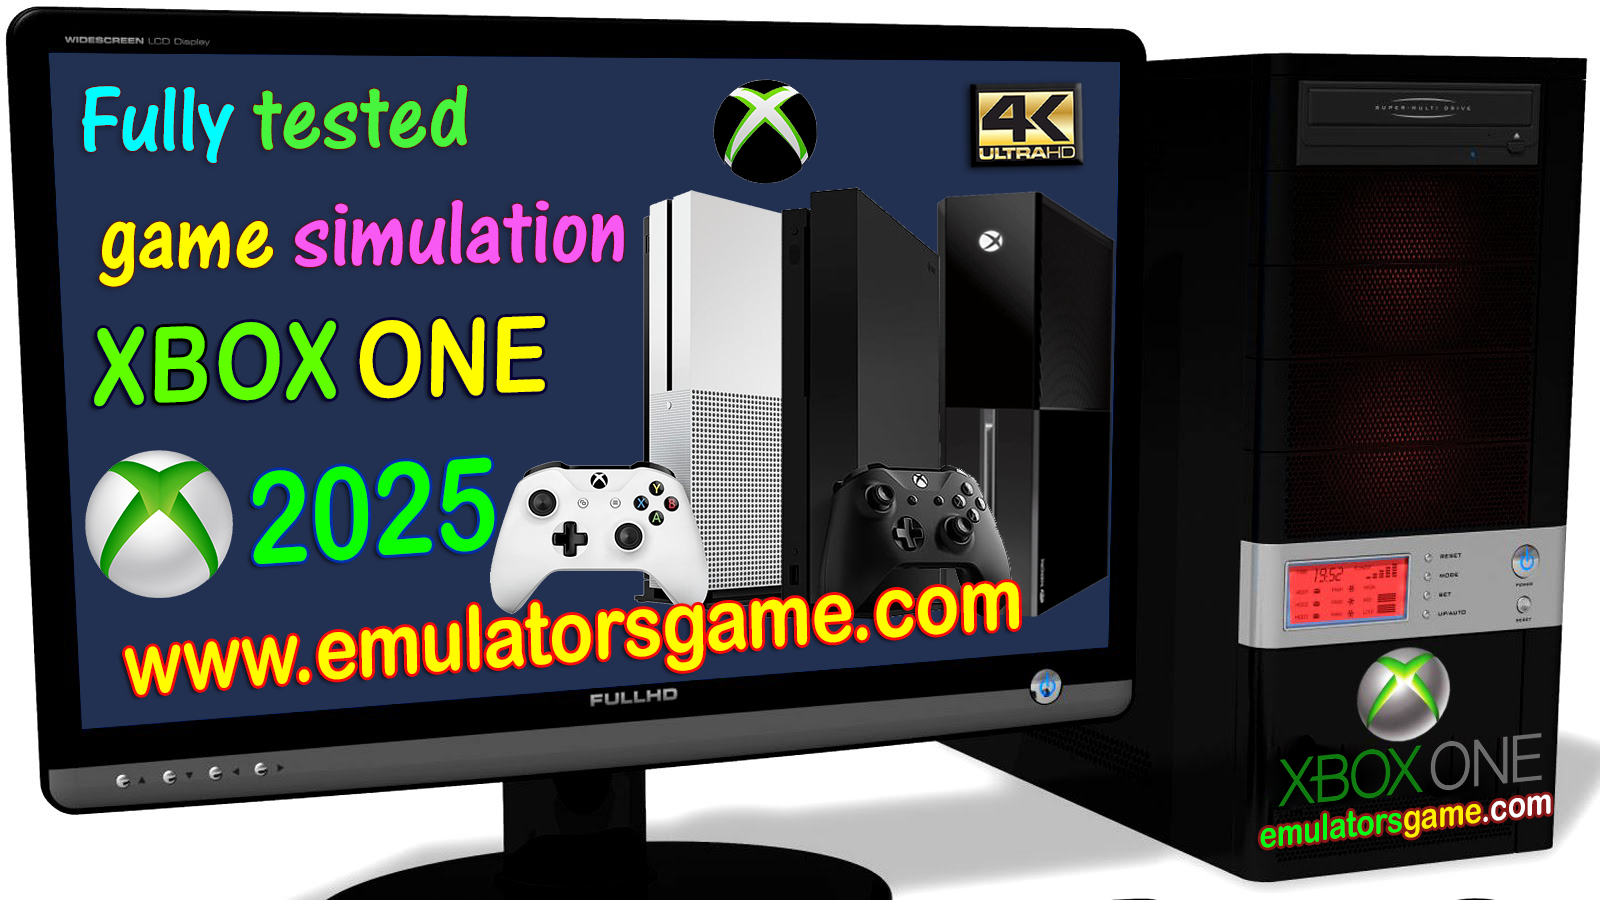 download latest xbox 360 emulator for pc